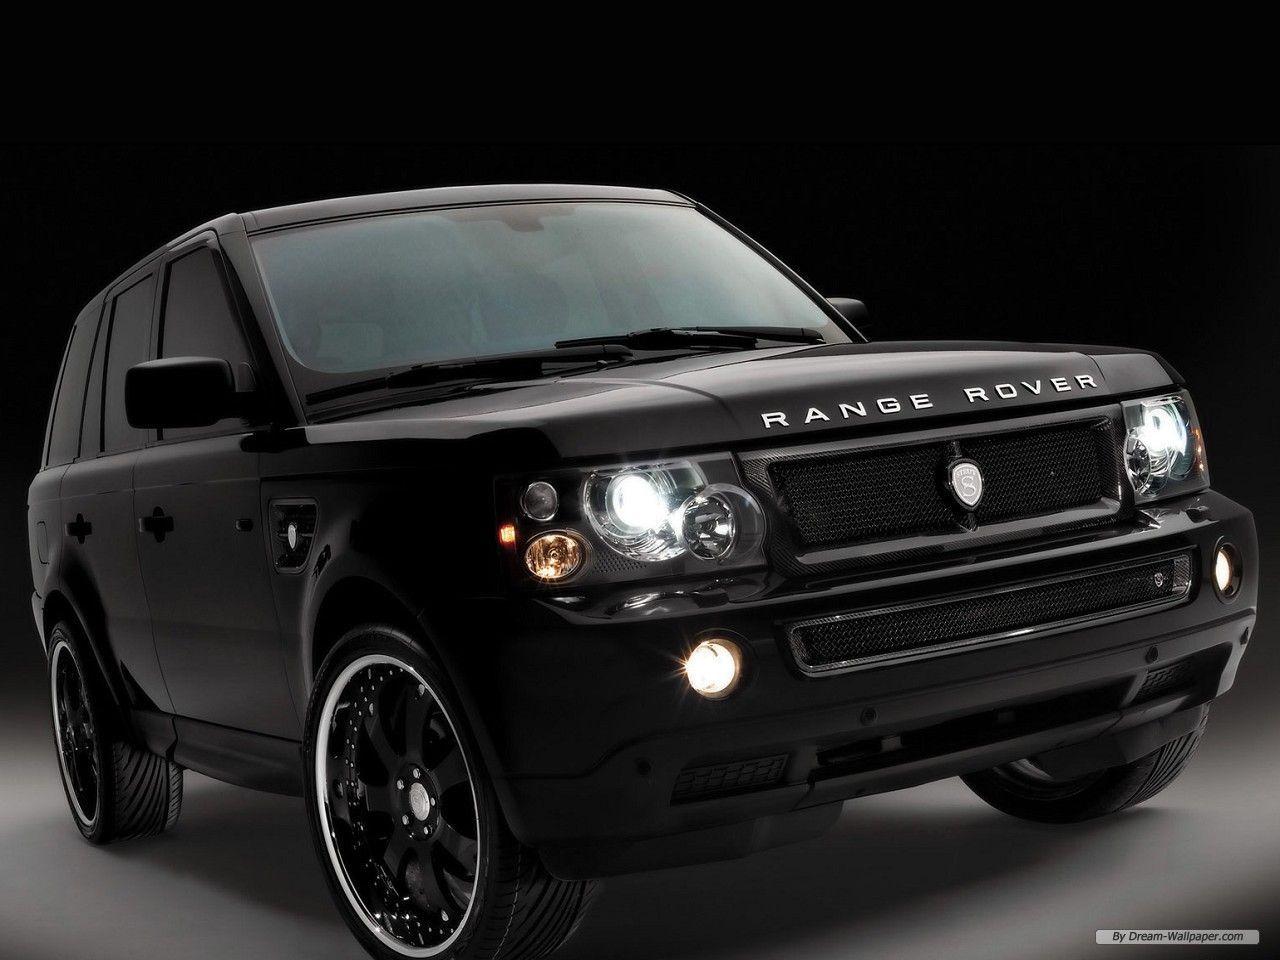 Range Rover Free Wallpaper Background HD Wallpaper Picture. Top